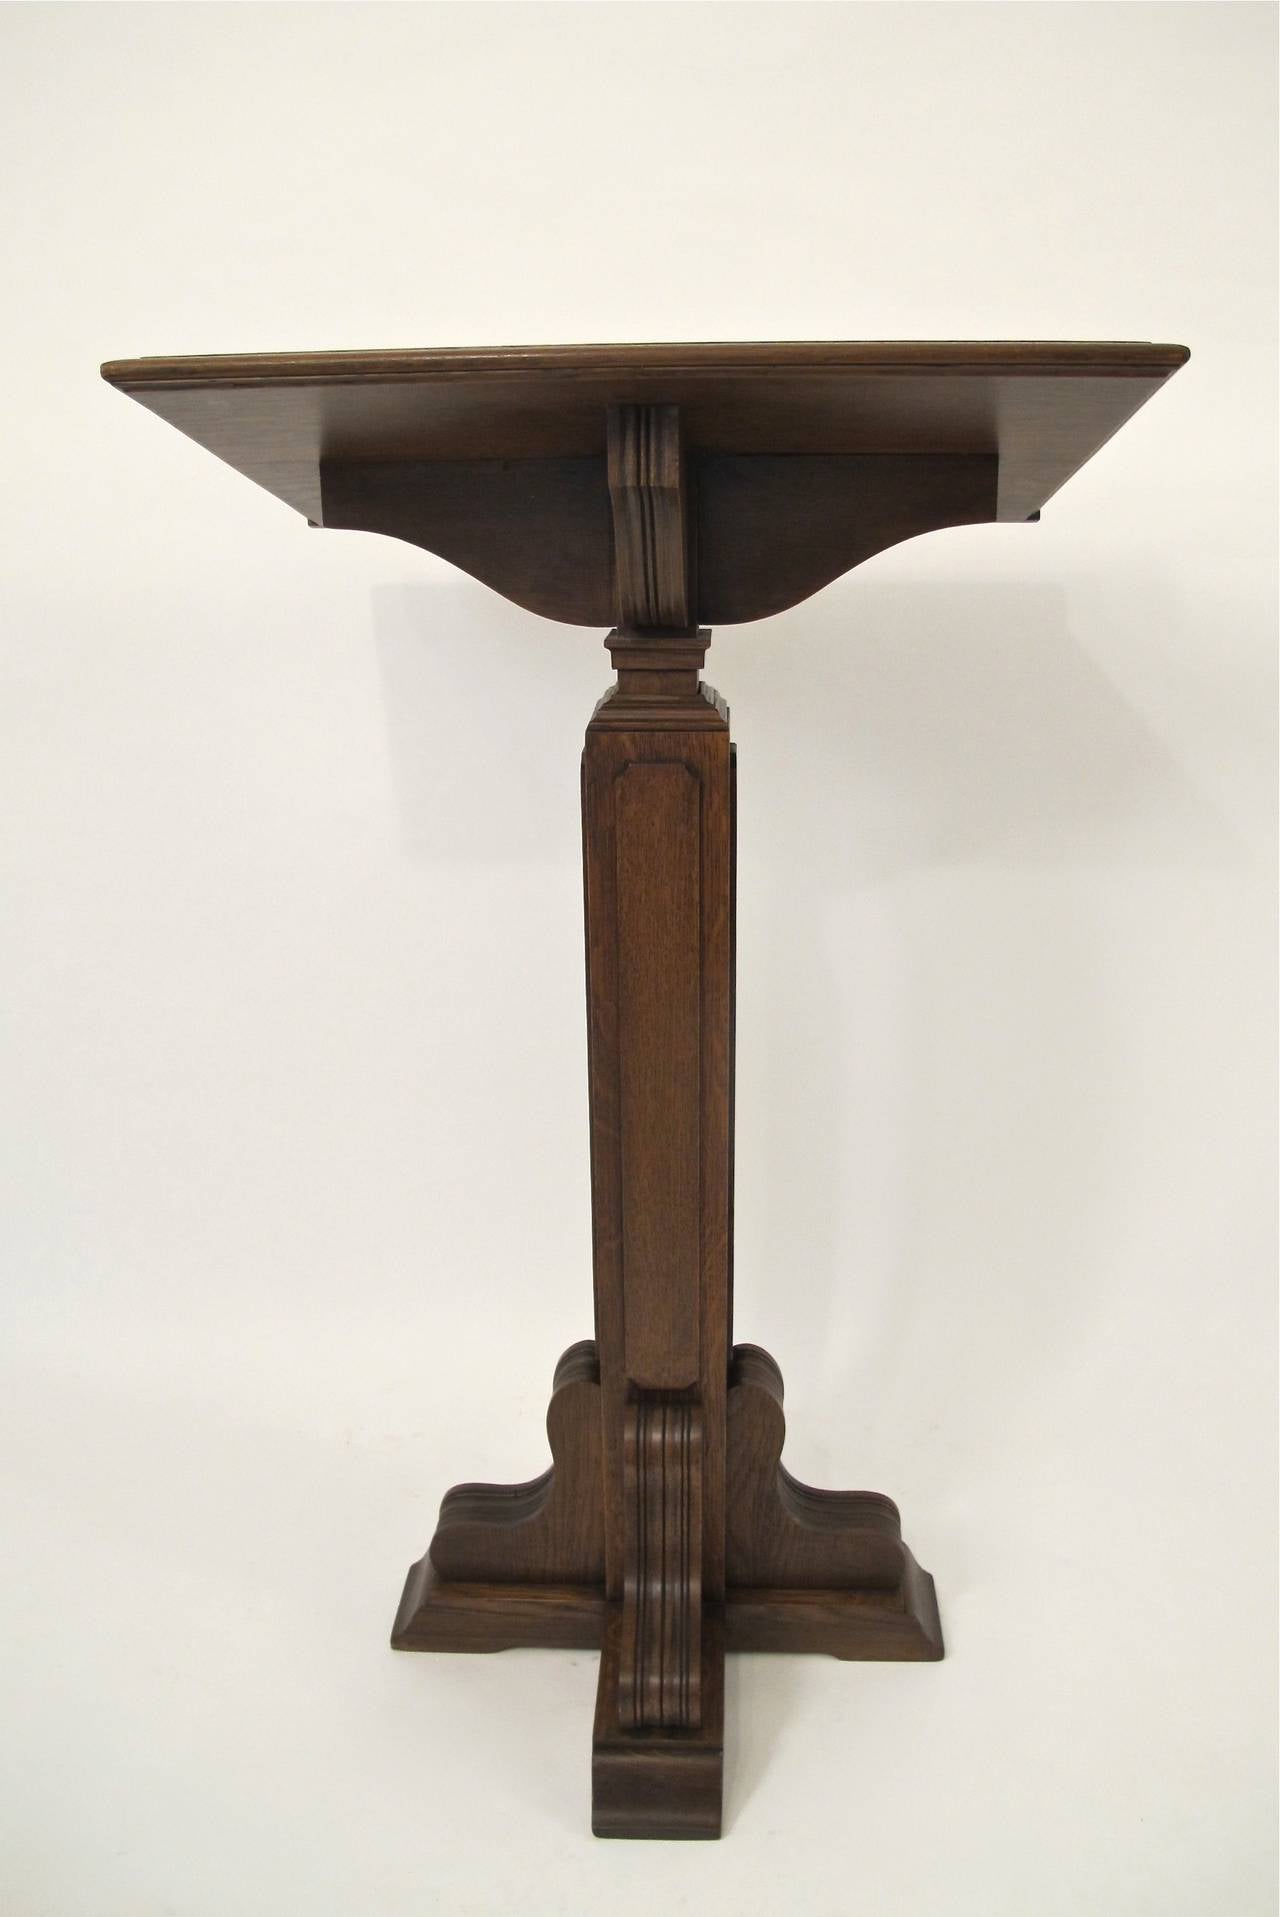 Adjustable oak lectern, adjusts to a maximum height of fifty inches.